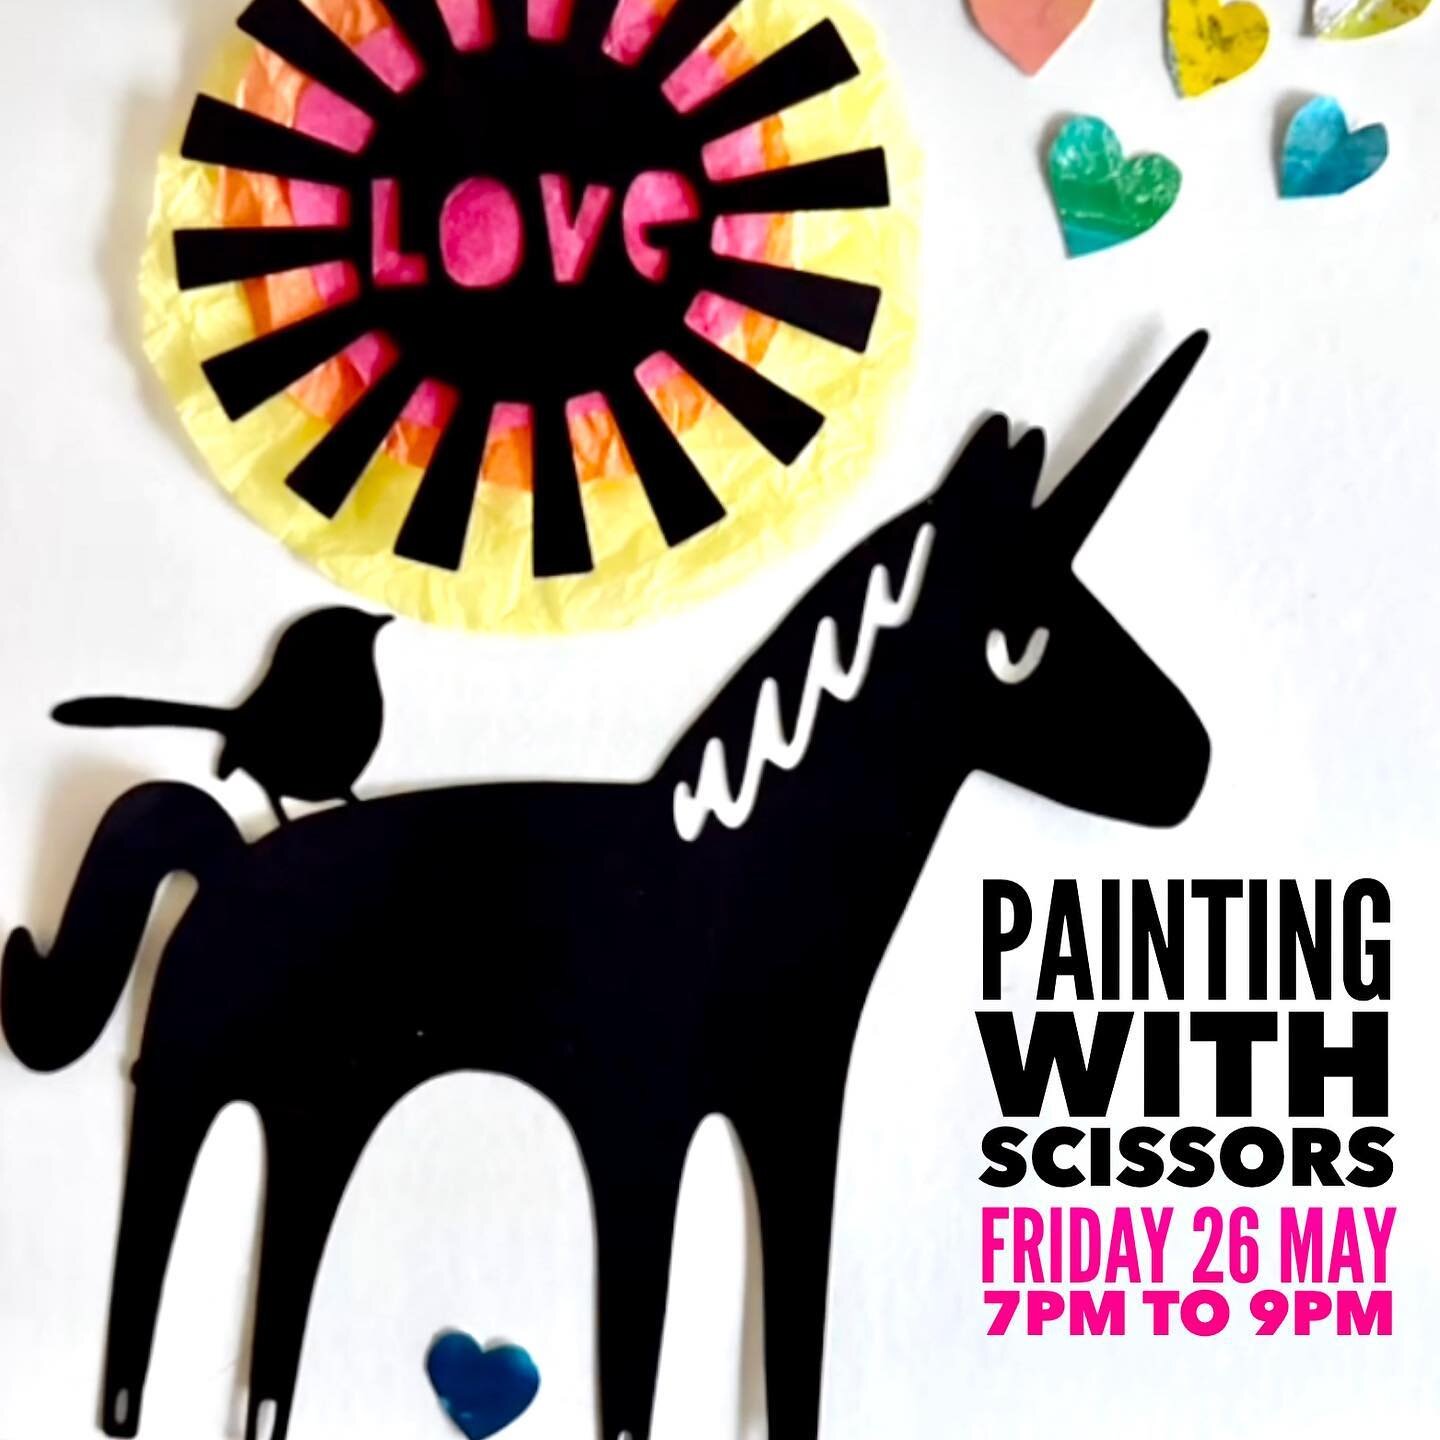 Our next Artynights is a fun session using scissors to create a colourful and inspiring collage!

What&rsquo;s your favourite mantra or saying?
What gets your positivity flowing?

Grab your scissors and join us for some bubbles, brilliant conversatio